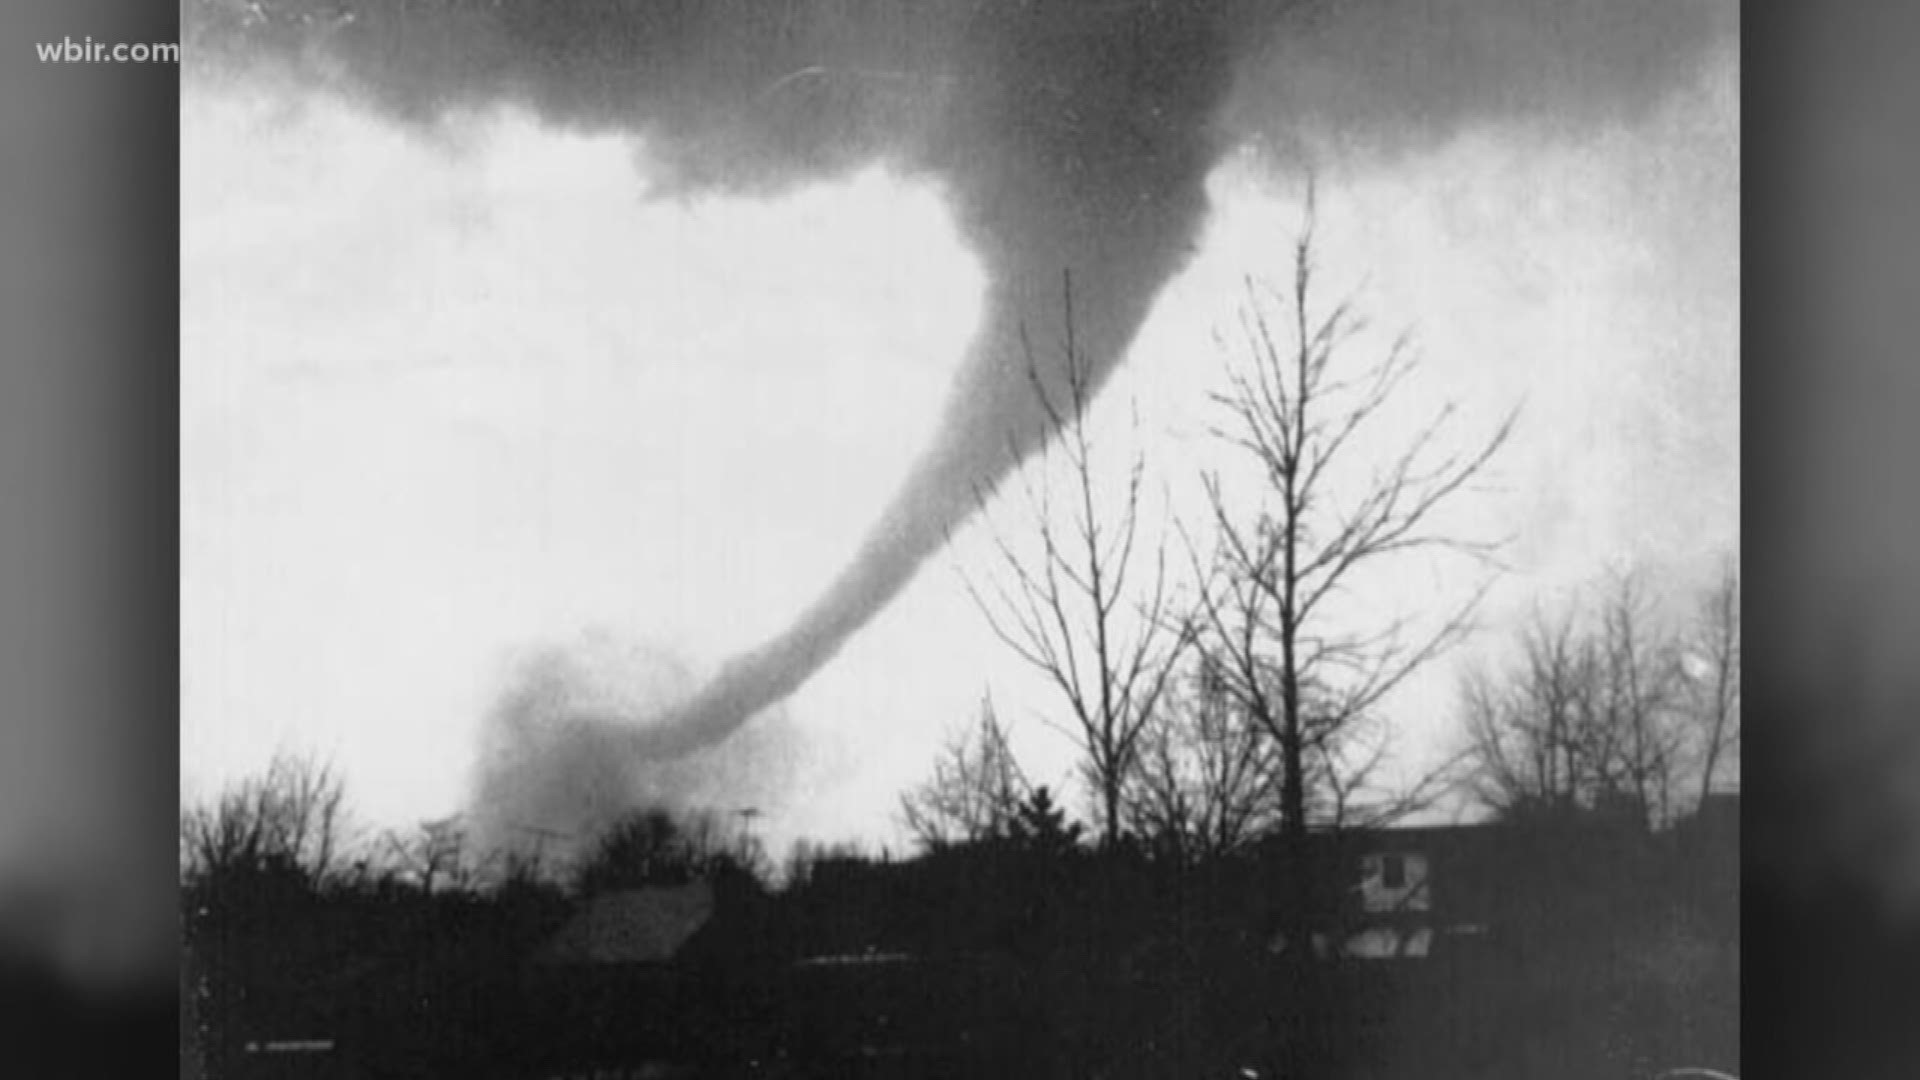 On April 3, 1974, 148 tornadoes touched down across 13 states and in Canada. It was the largest tornado outbreak in a 24-hour period ever recorded, until April 27, 2011 topped it with 278 tornadoes